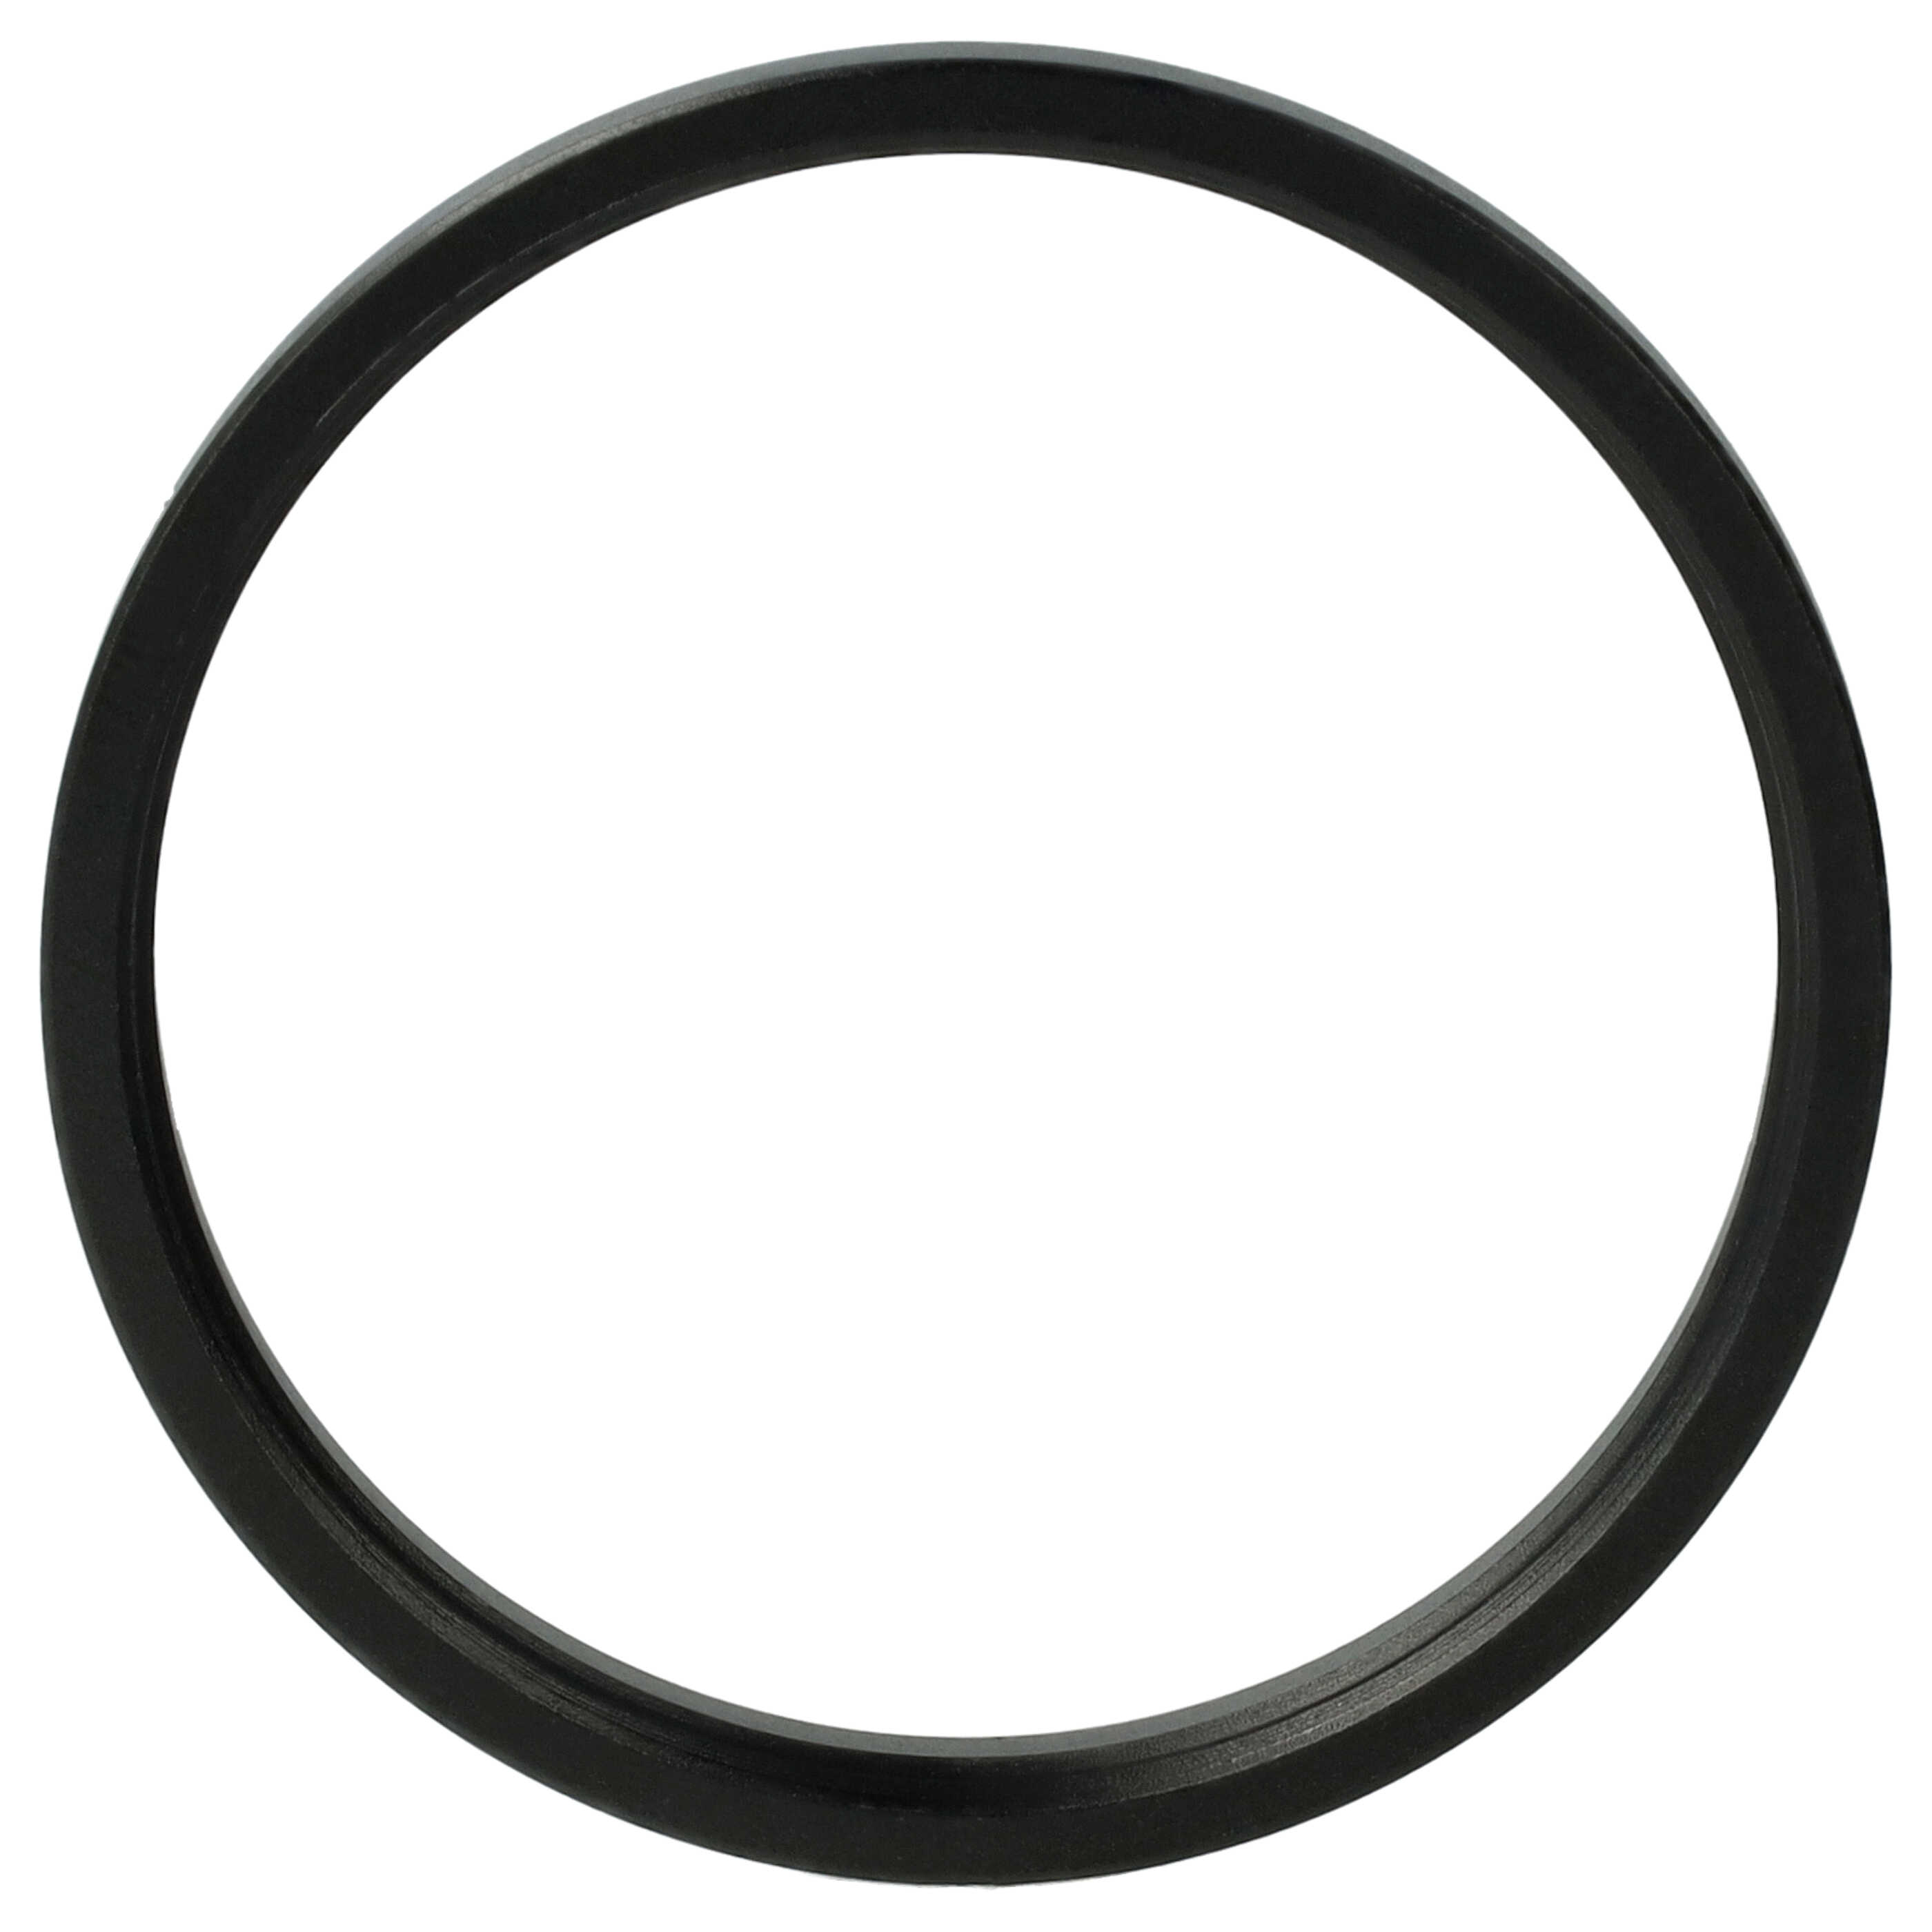 Step-Down Ring Adapter from 42 mm to 40.5 mm suitable for Camera Lens - Filter Adapter, metal